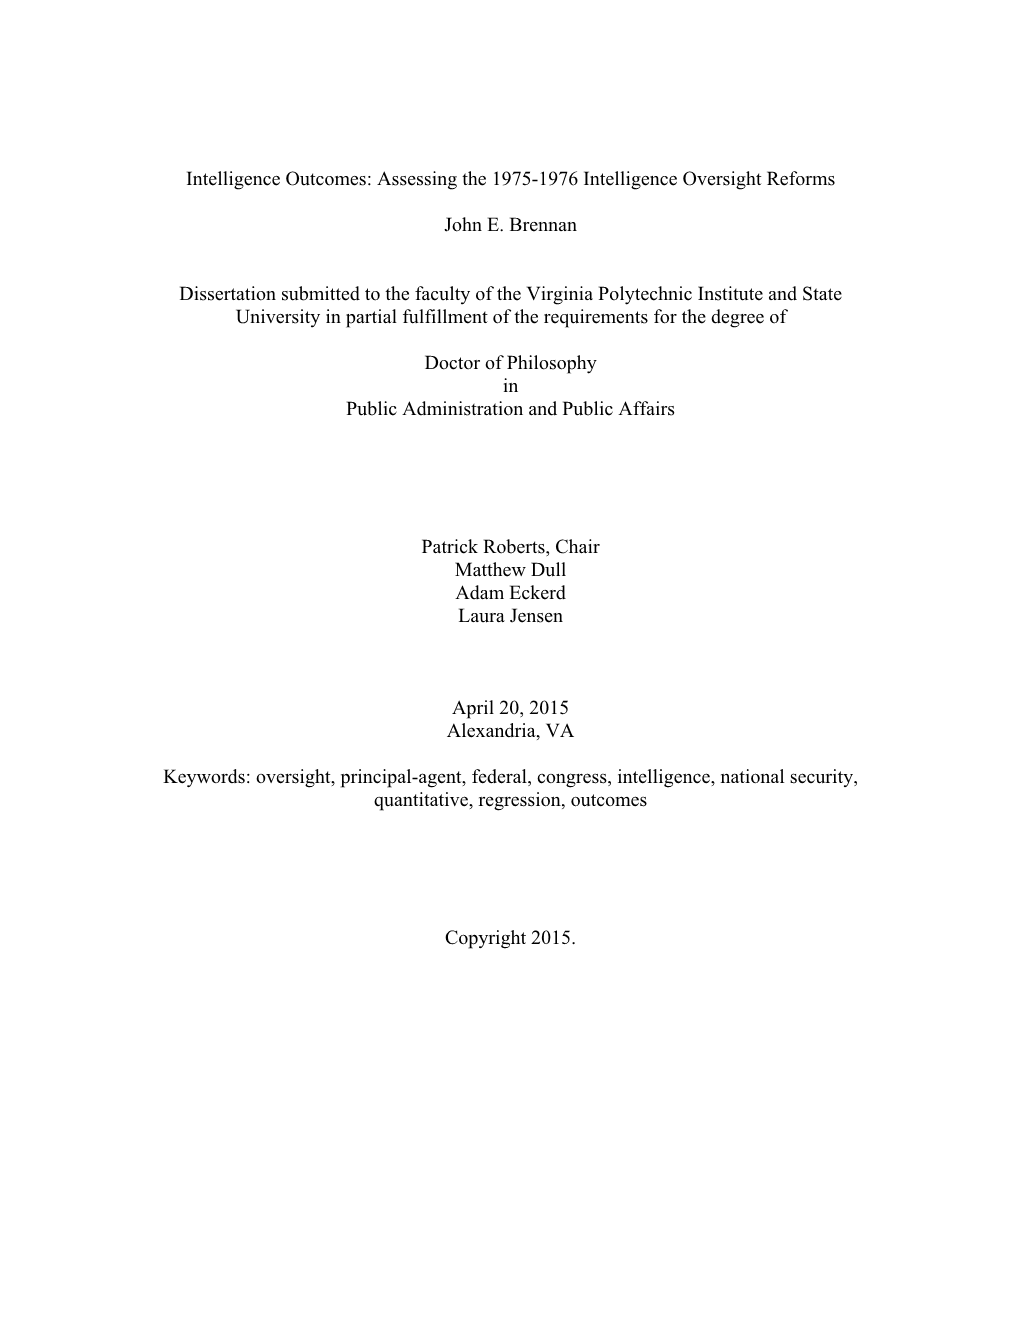 Intelligence Outcomes: Assessing the 1975-1976 Intelligence Oversight Reforms